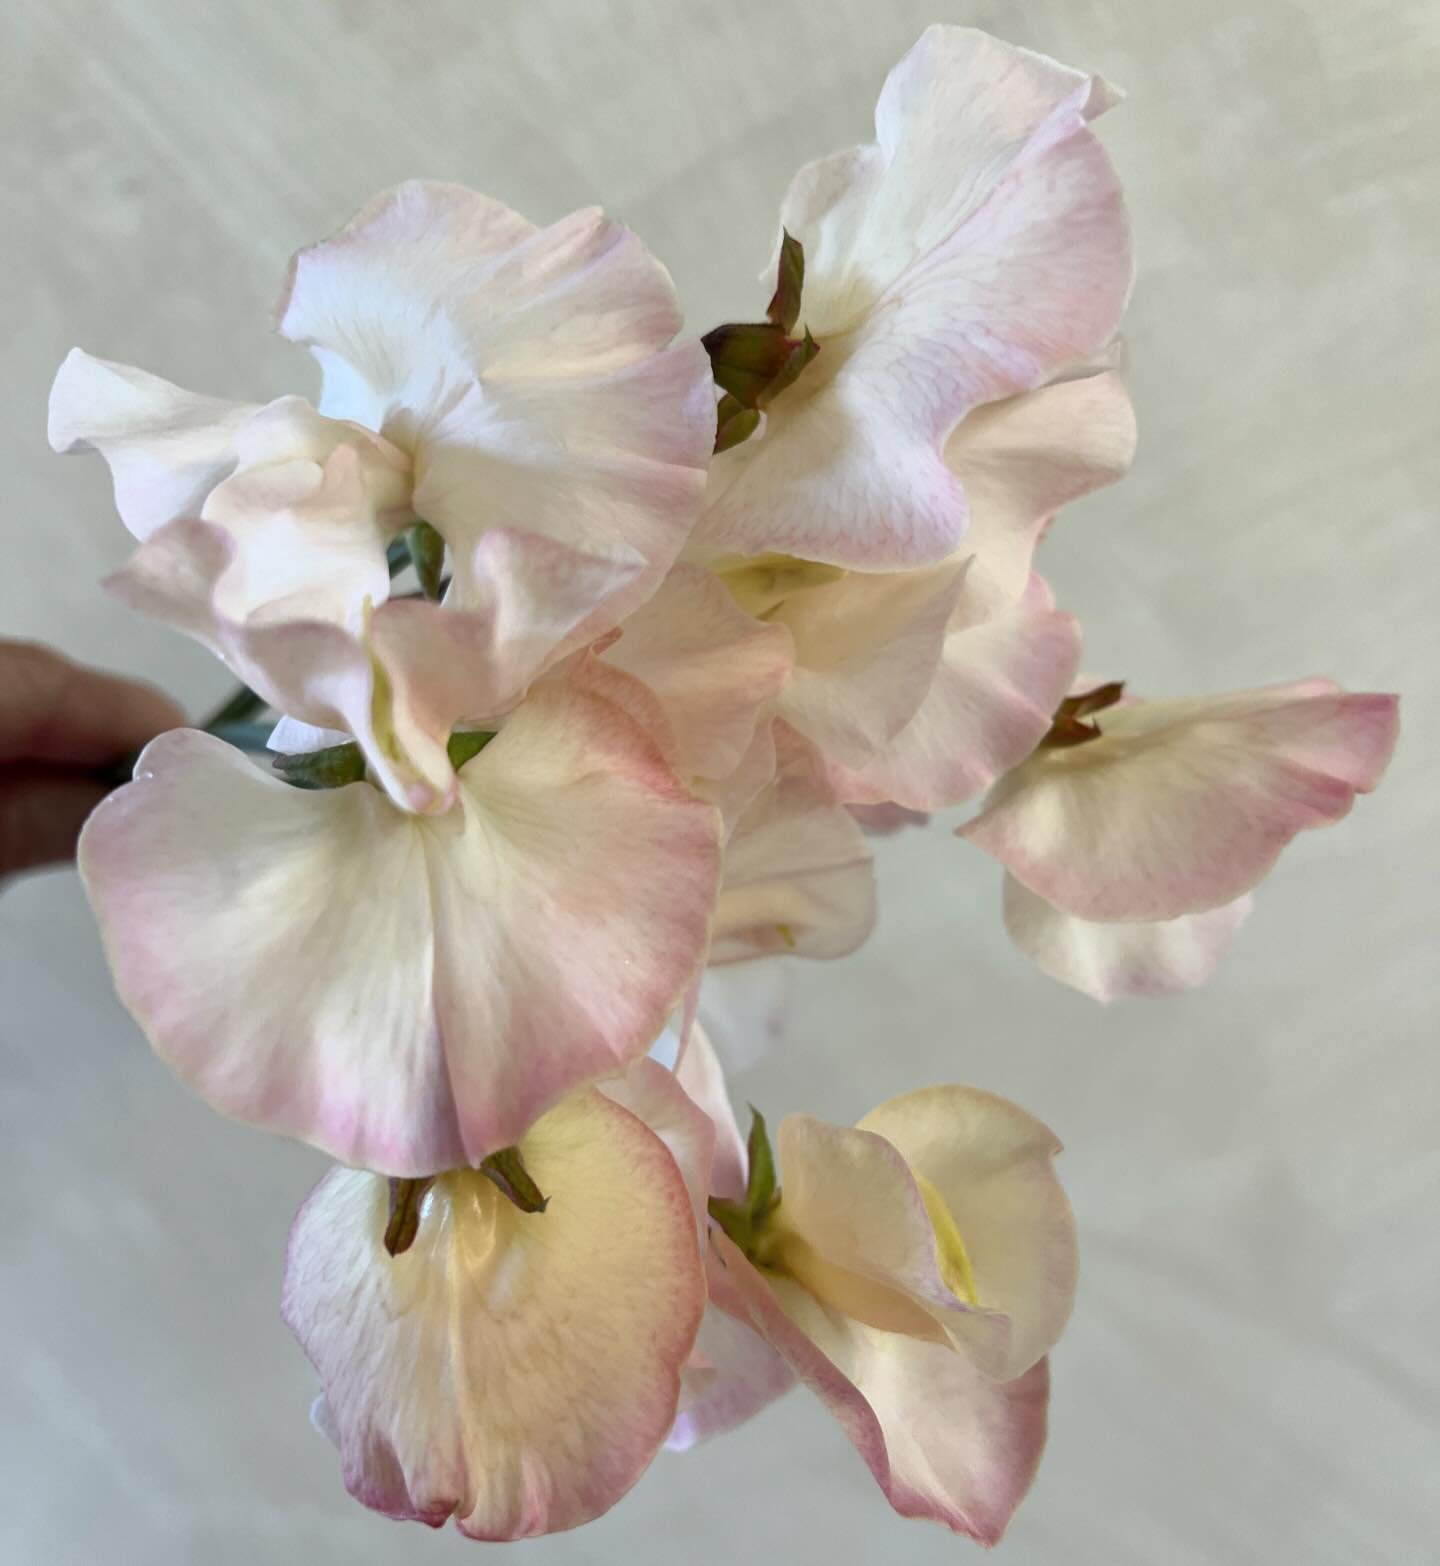 Finally the first sweet peas are starting to bloom. Keira Madeleine. An elegant pea to start the line up. More to come!